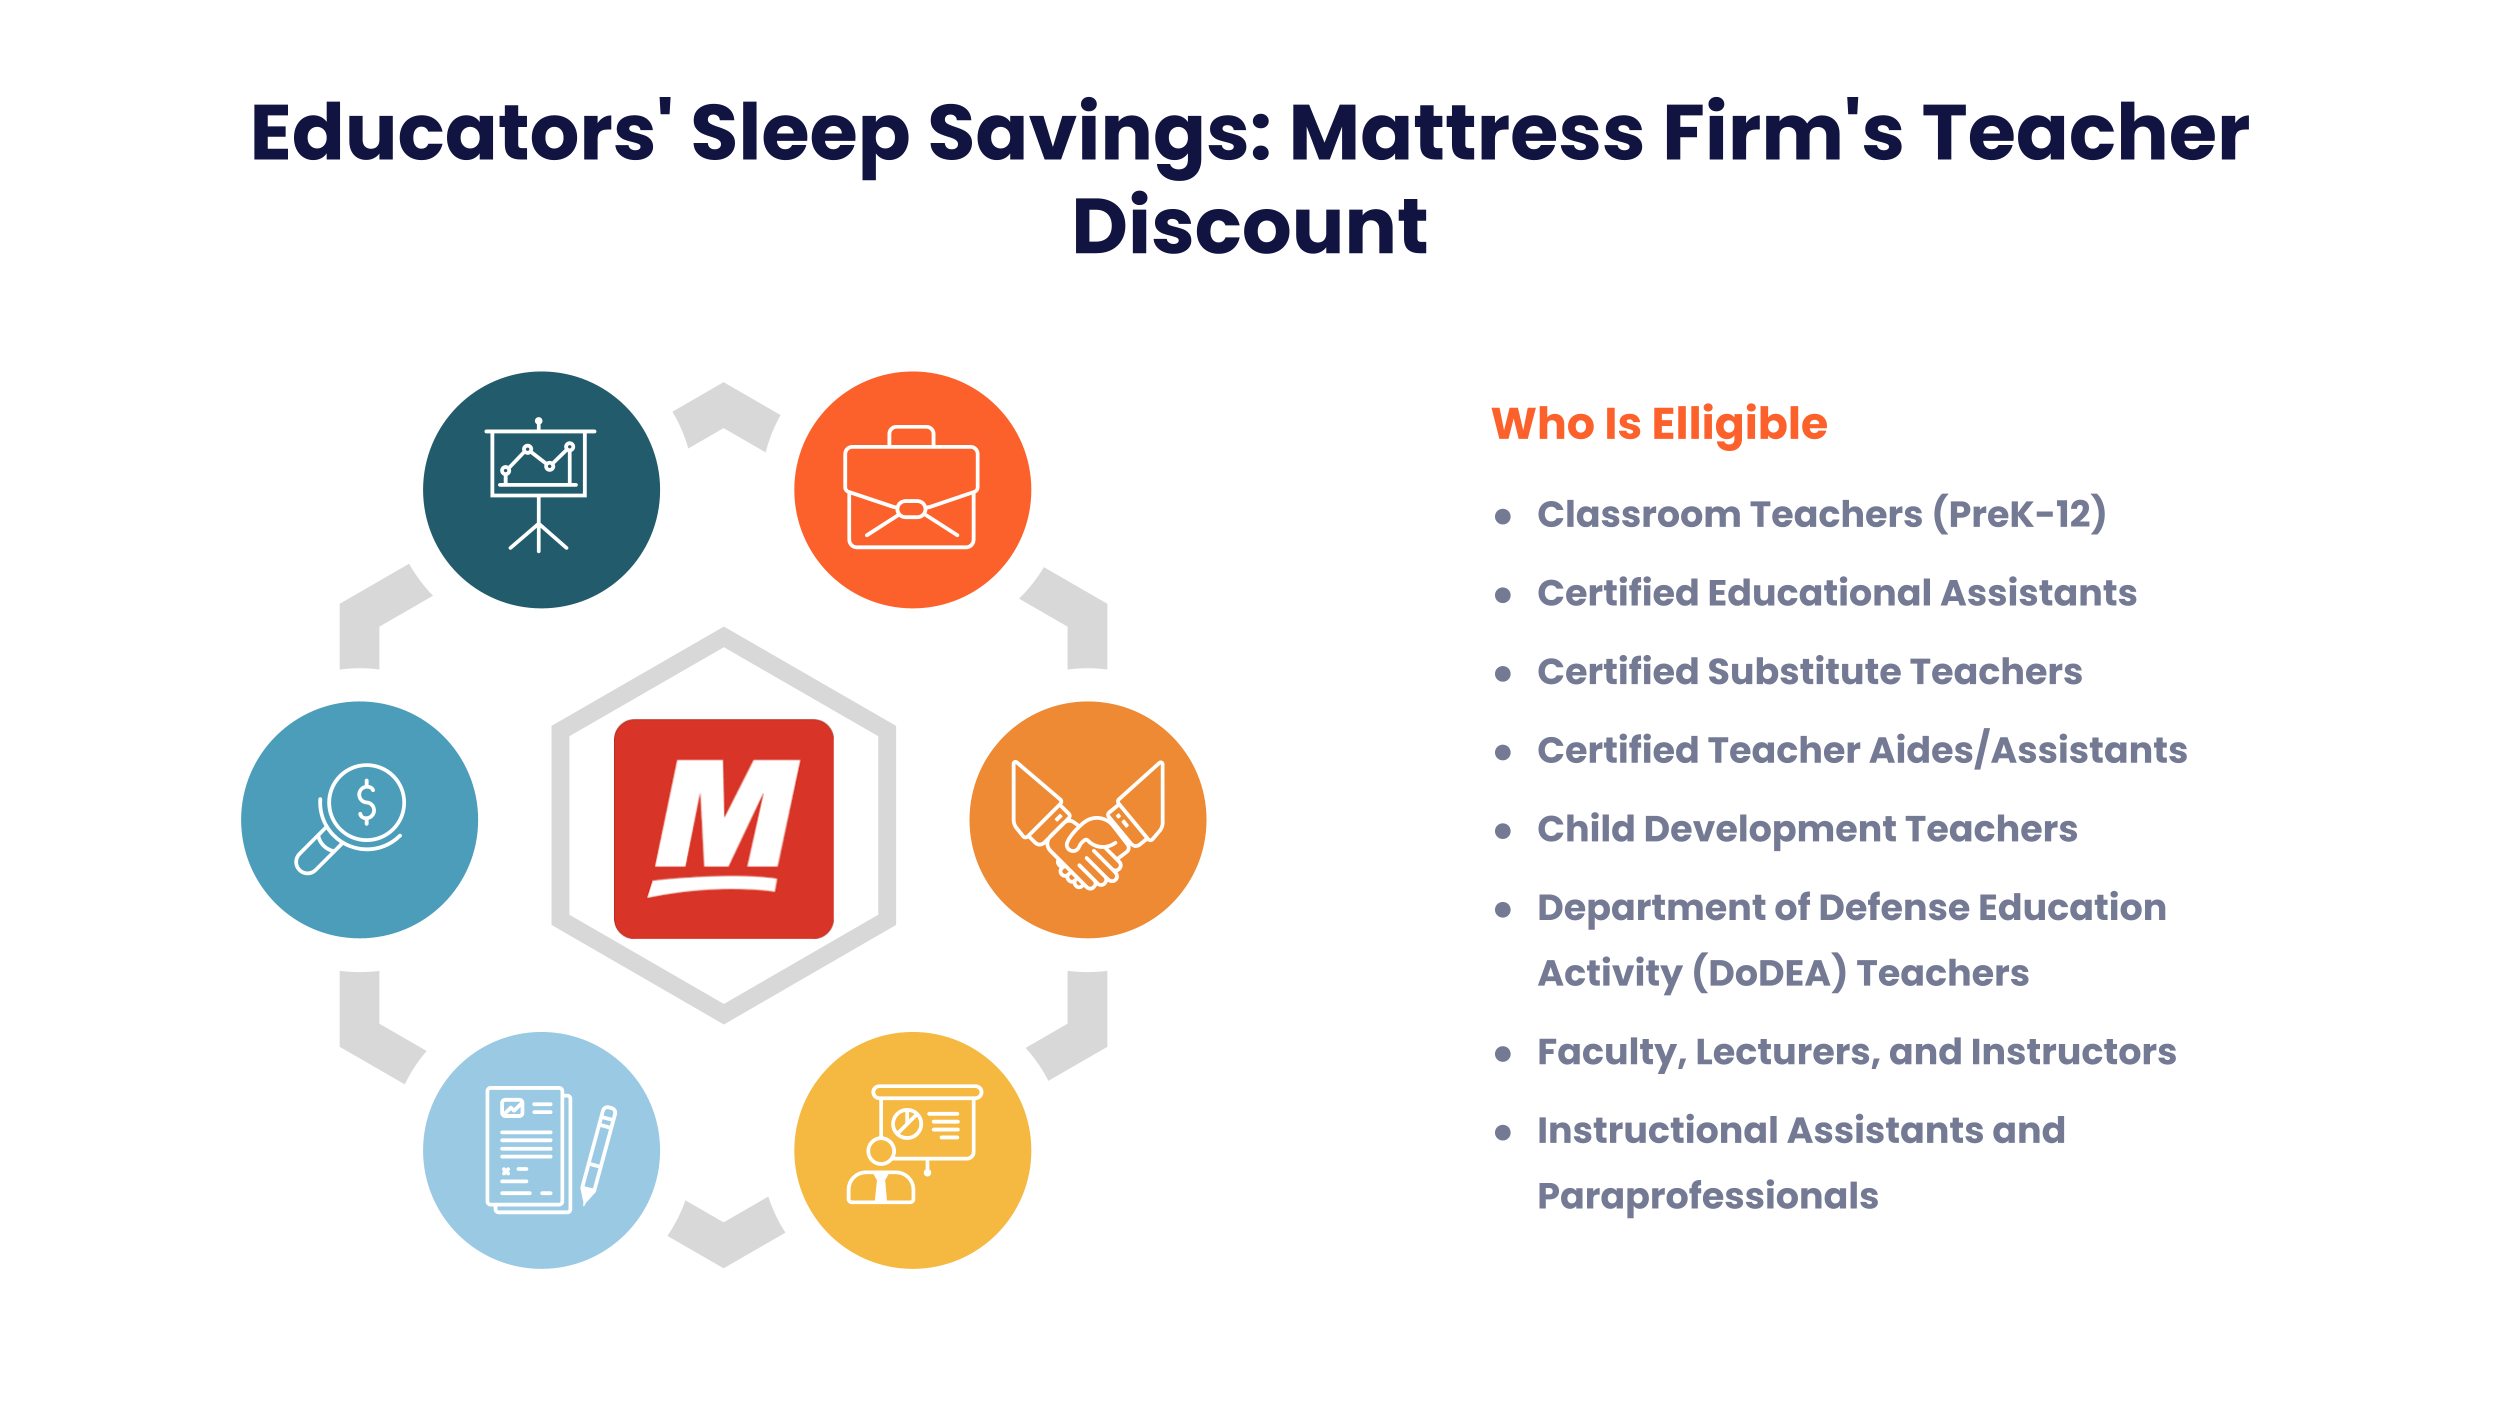 Mattress Firm Teacher Discount: Everything You Need to Know